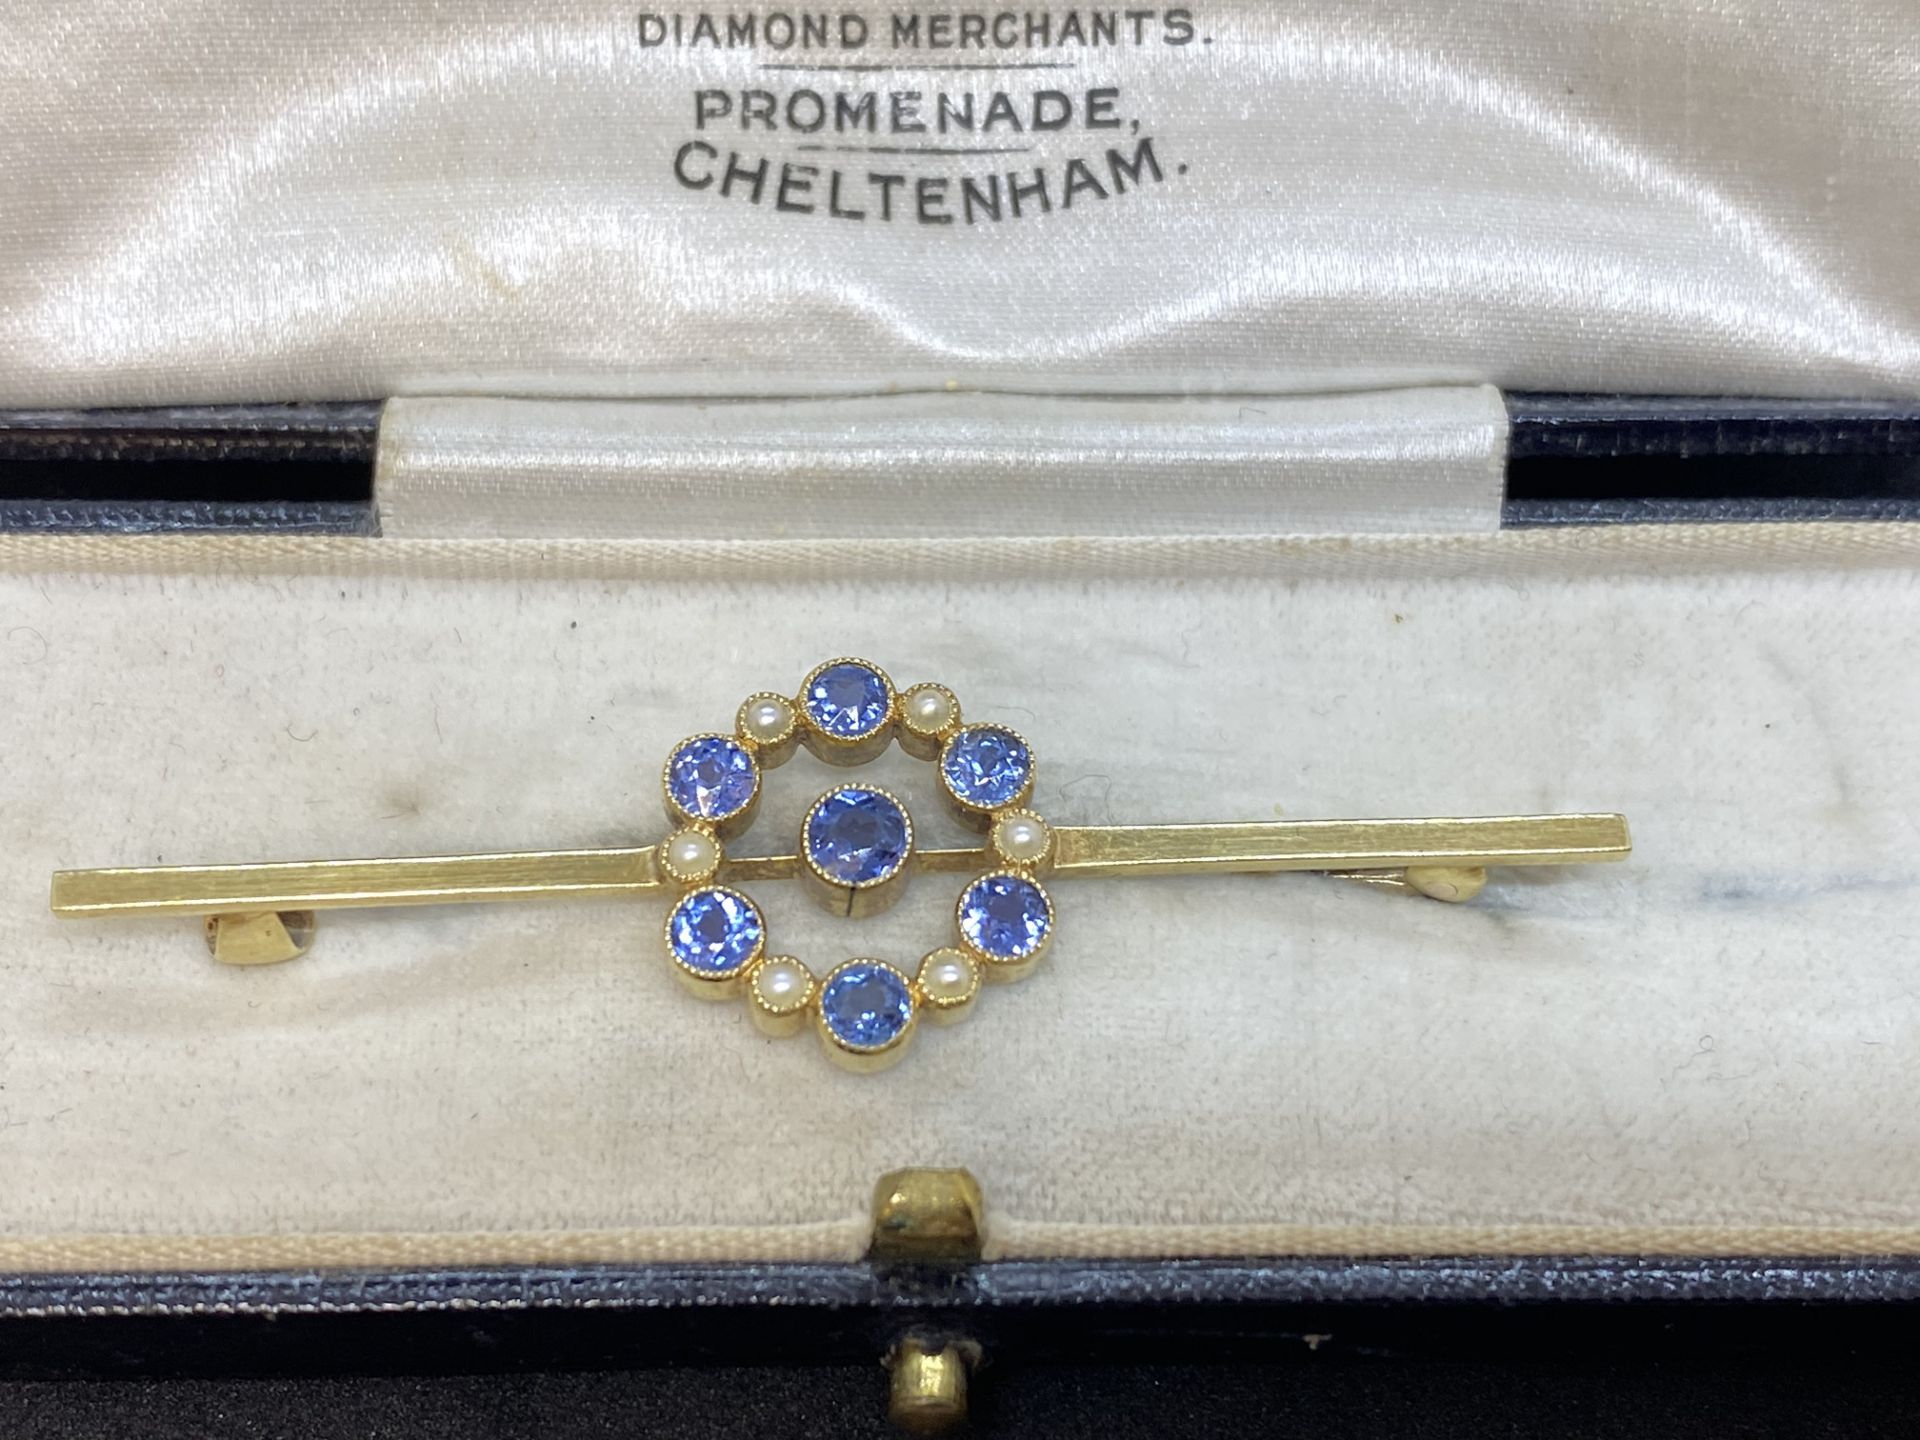 ANTIQUE 15ct GOLD SAPPHIRE & PEARL BROOCH IN OLD BOX INC